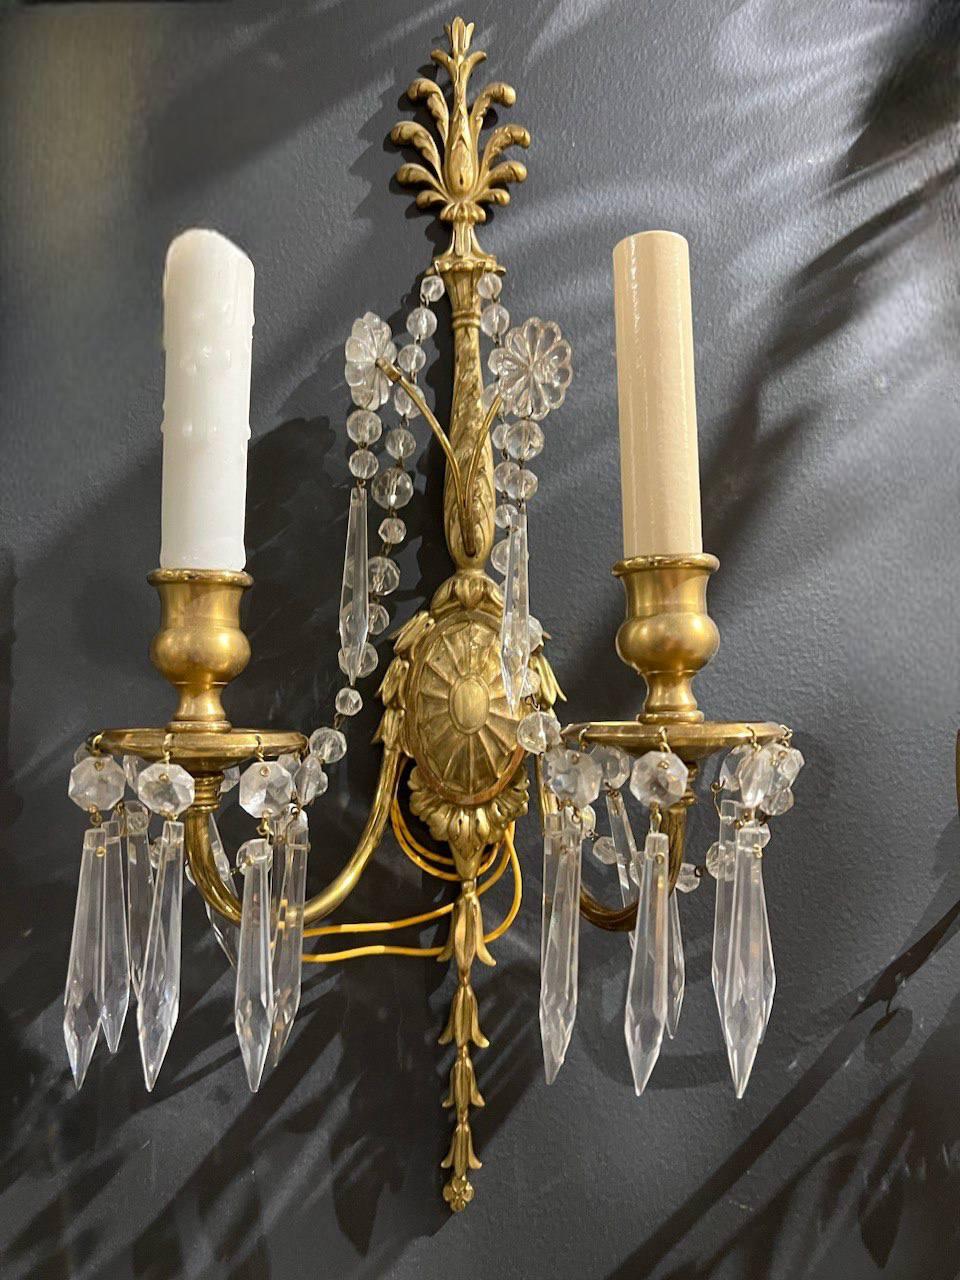 1920's Caldwell Gilt Bronze Sconces with Crystal Hangings For Sale 1